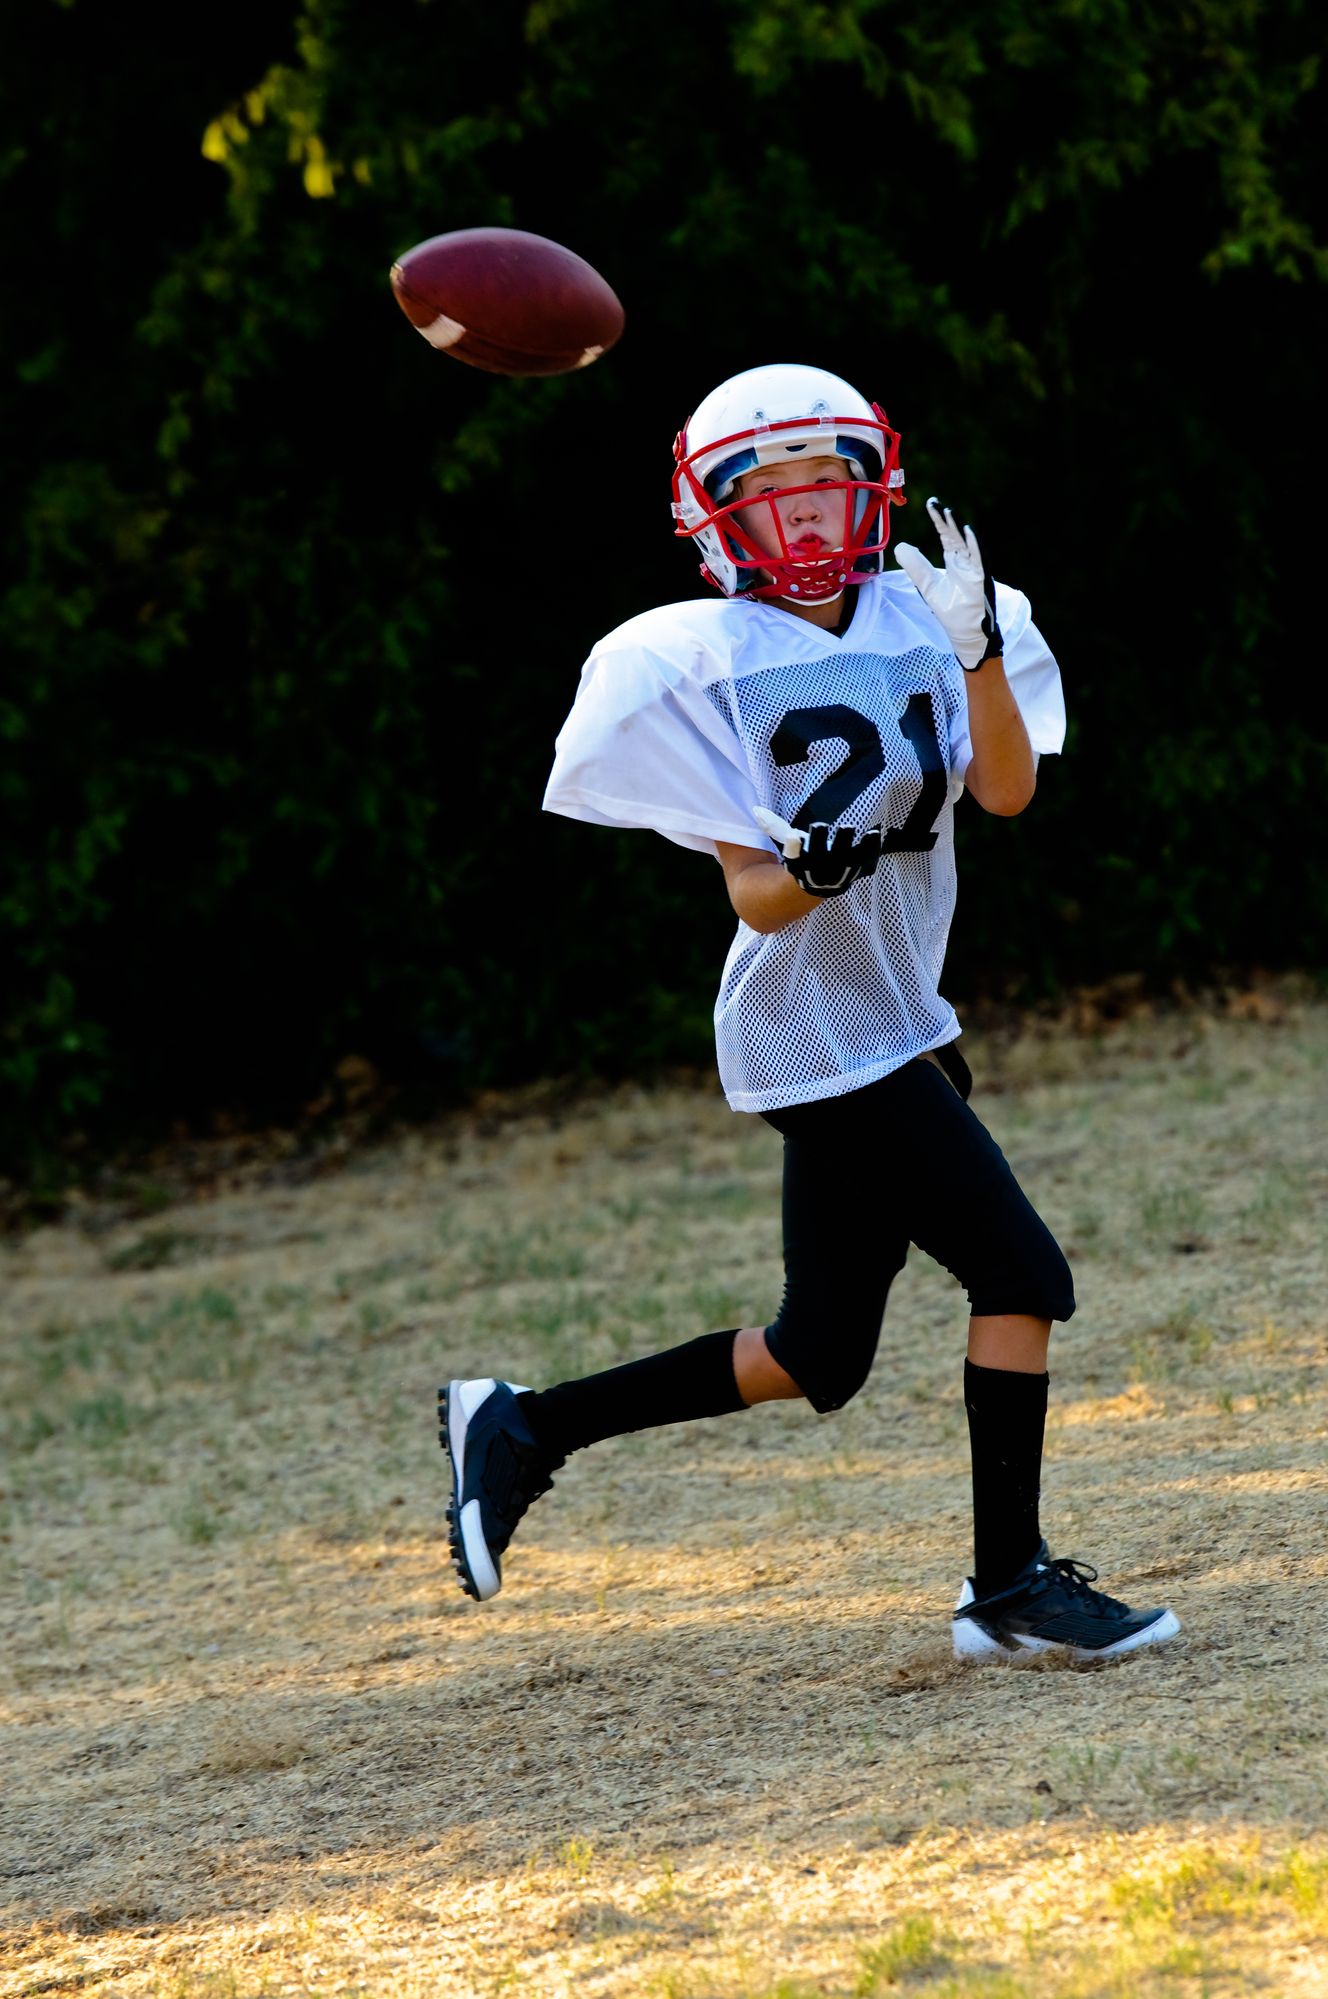 Young football player about to catch the football.